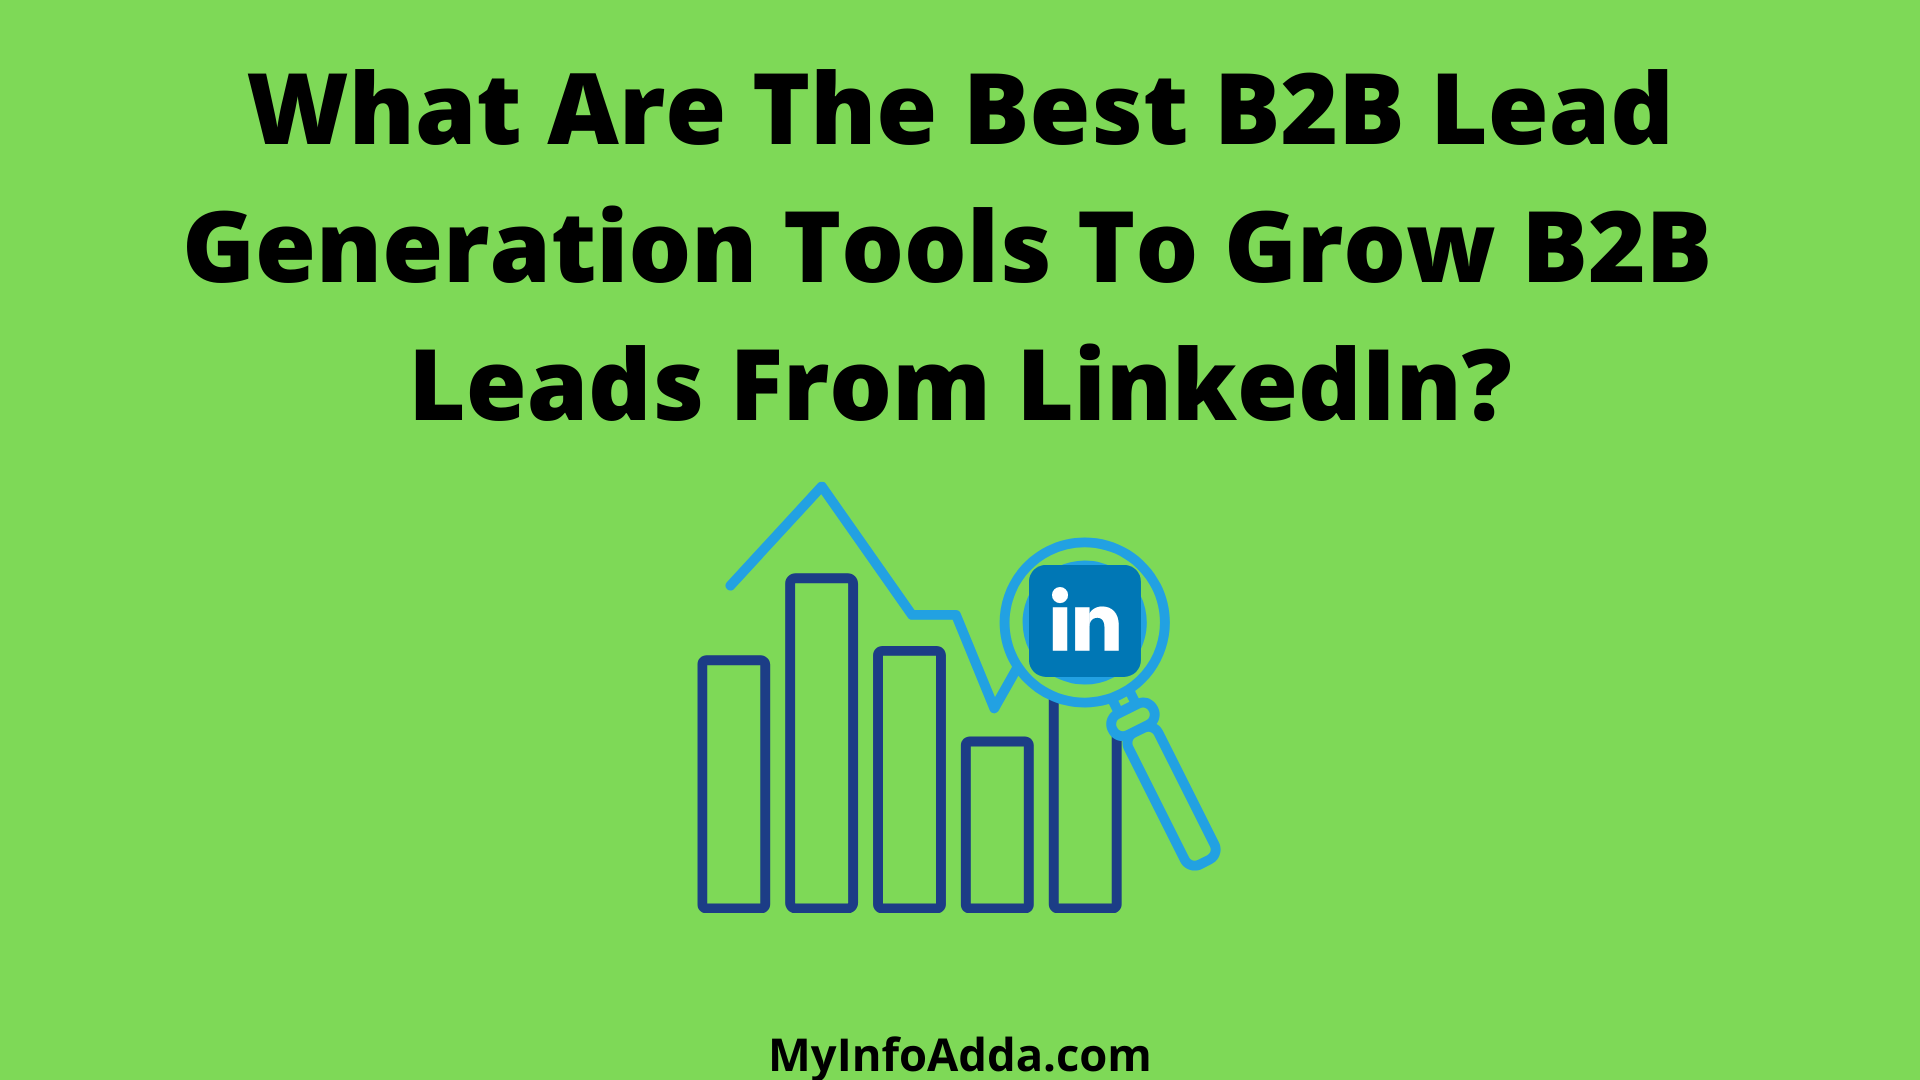 What Are The Best B2B Lead Generation Tools To Grow B2B Leads From LinkedIn